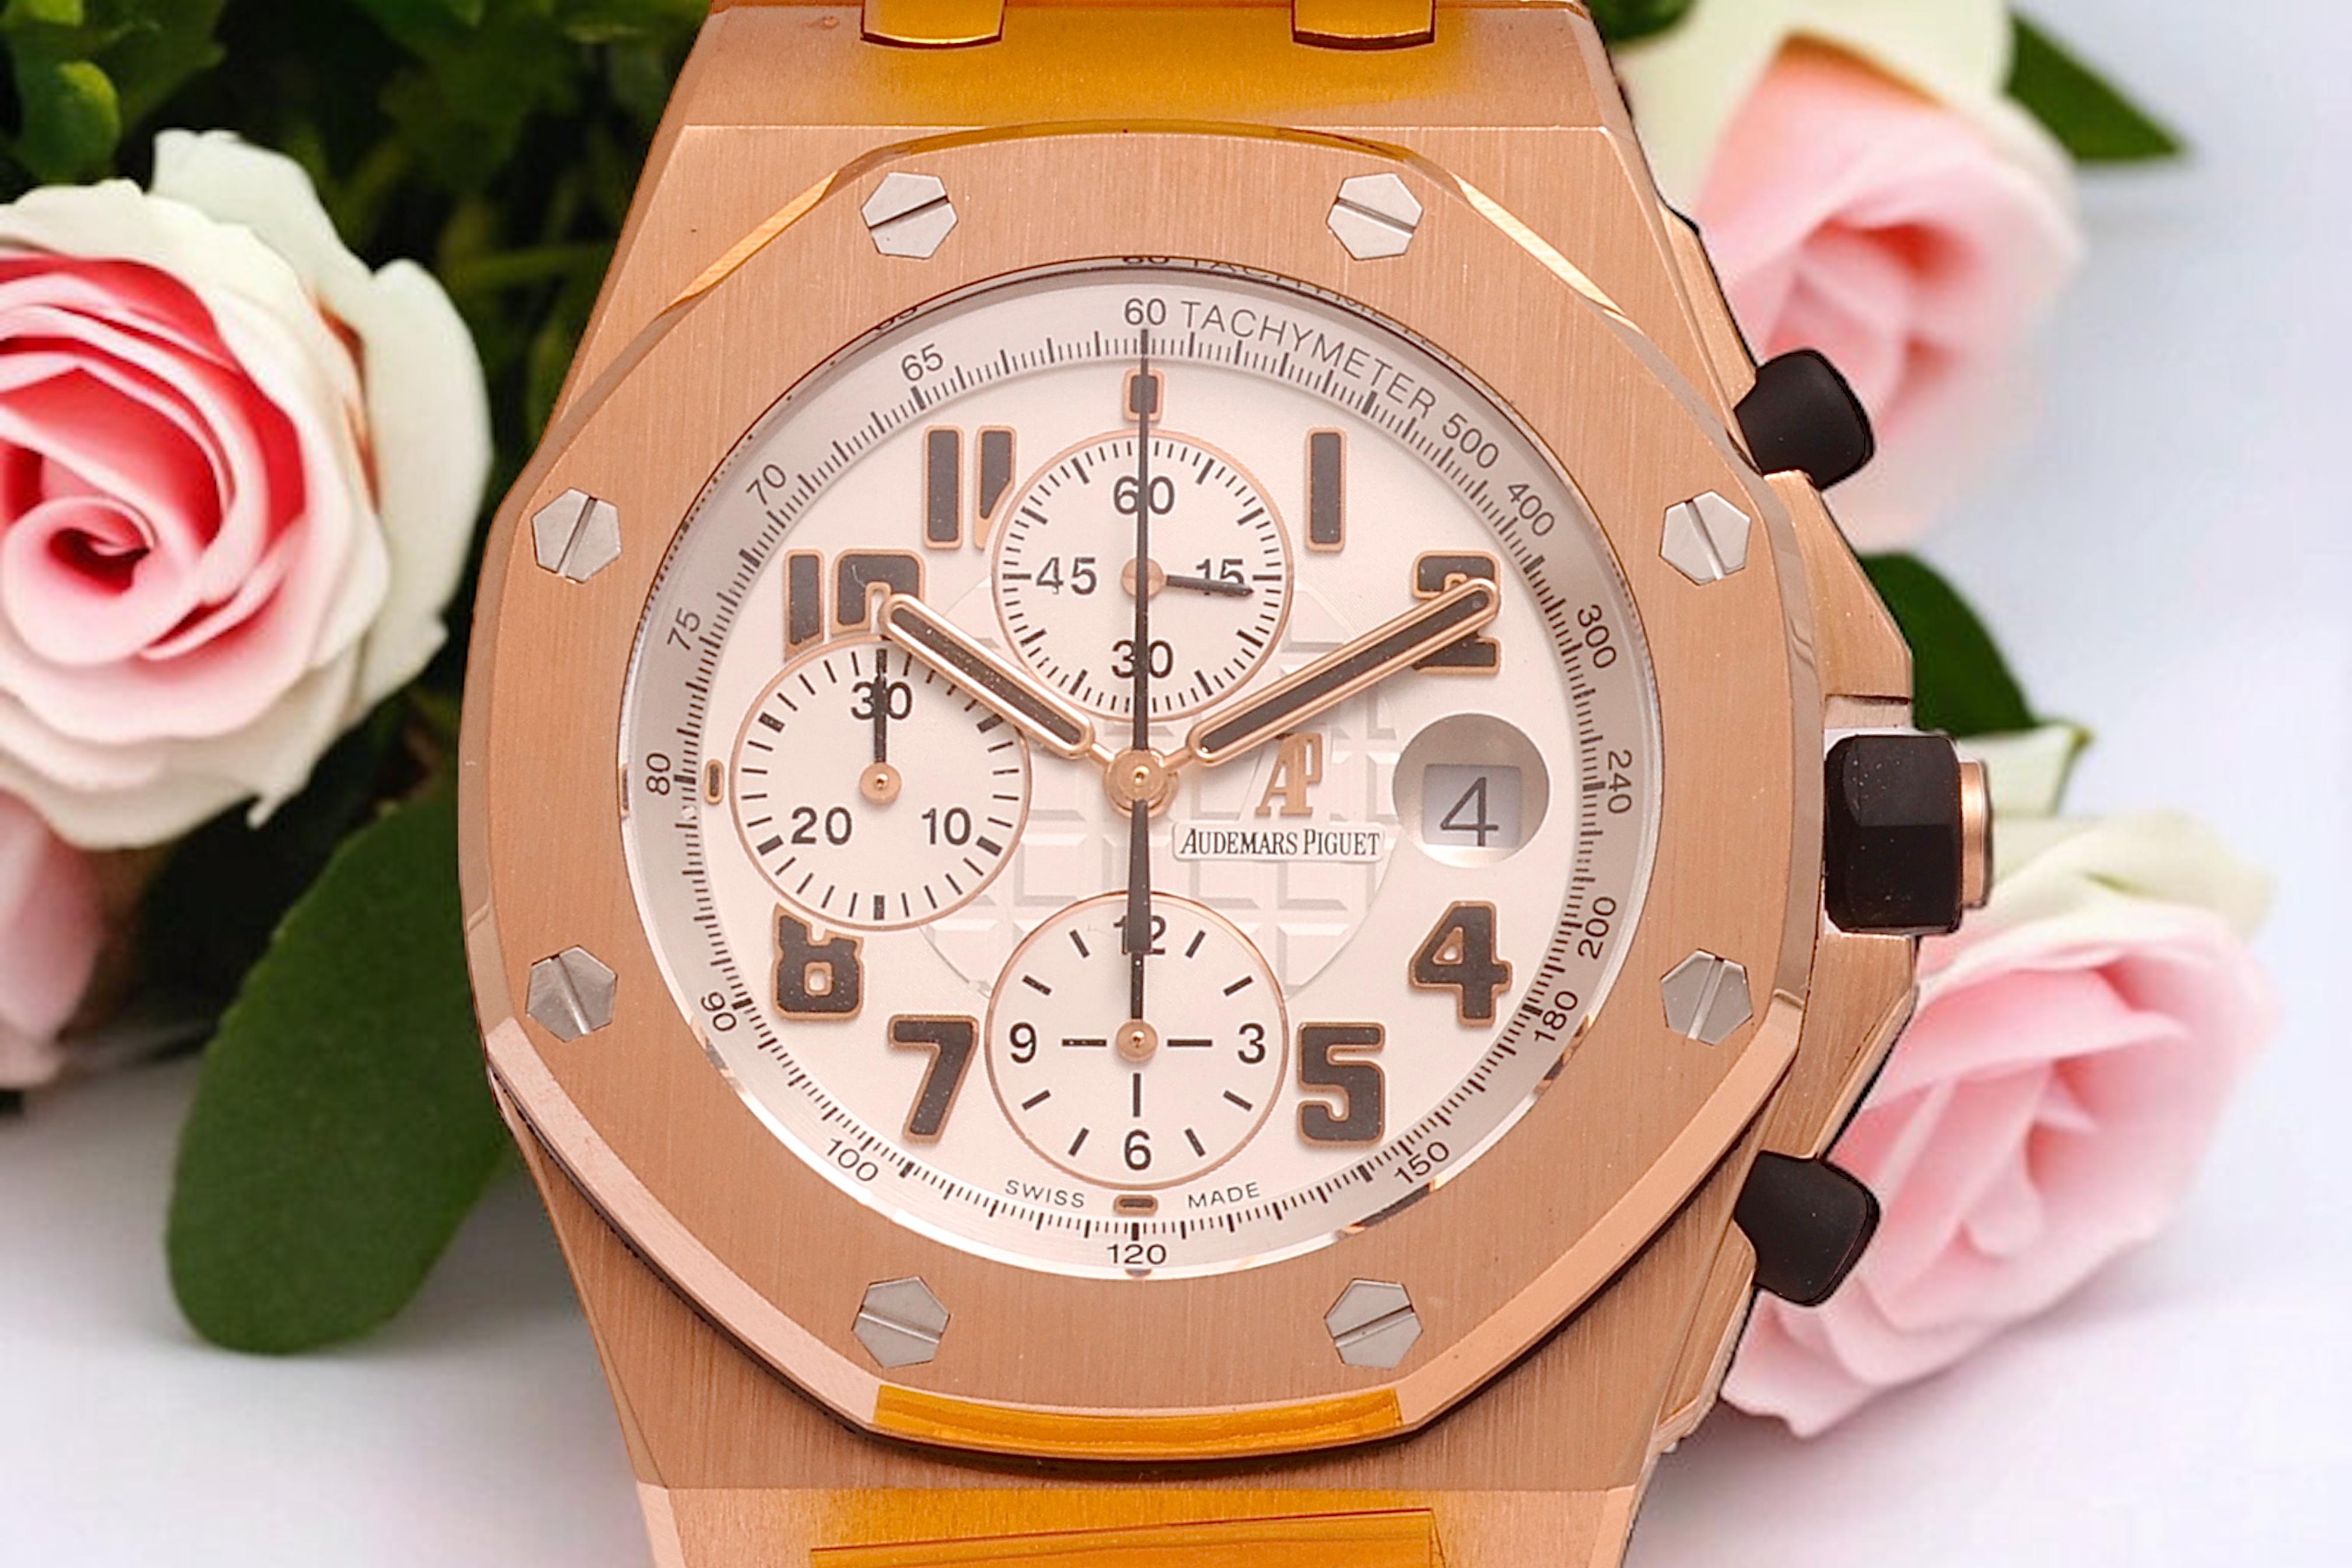 18 Kt Pink/Rose Gold Audemars Piguet Off Shore Chronograph, Extract/Box/Revision For Sale 6